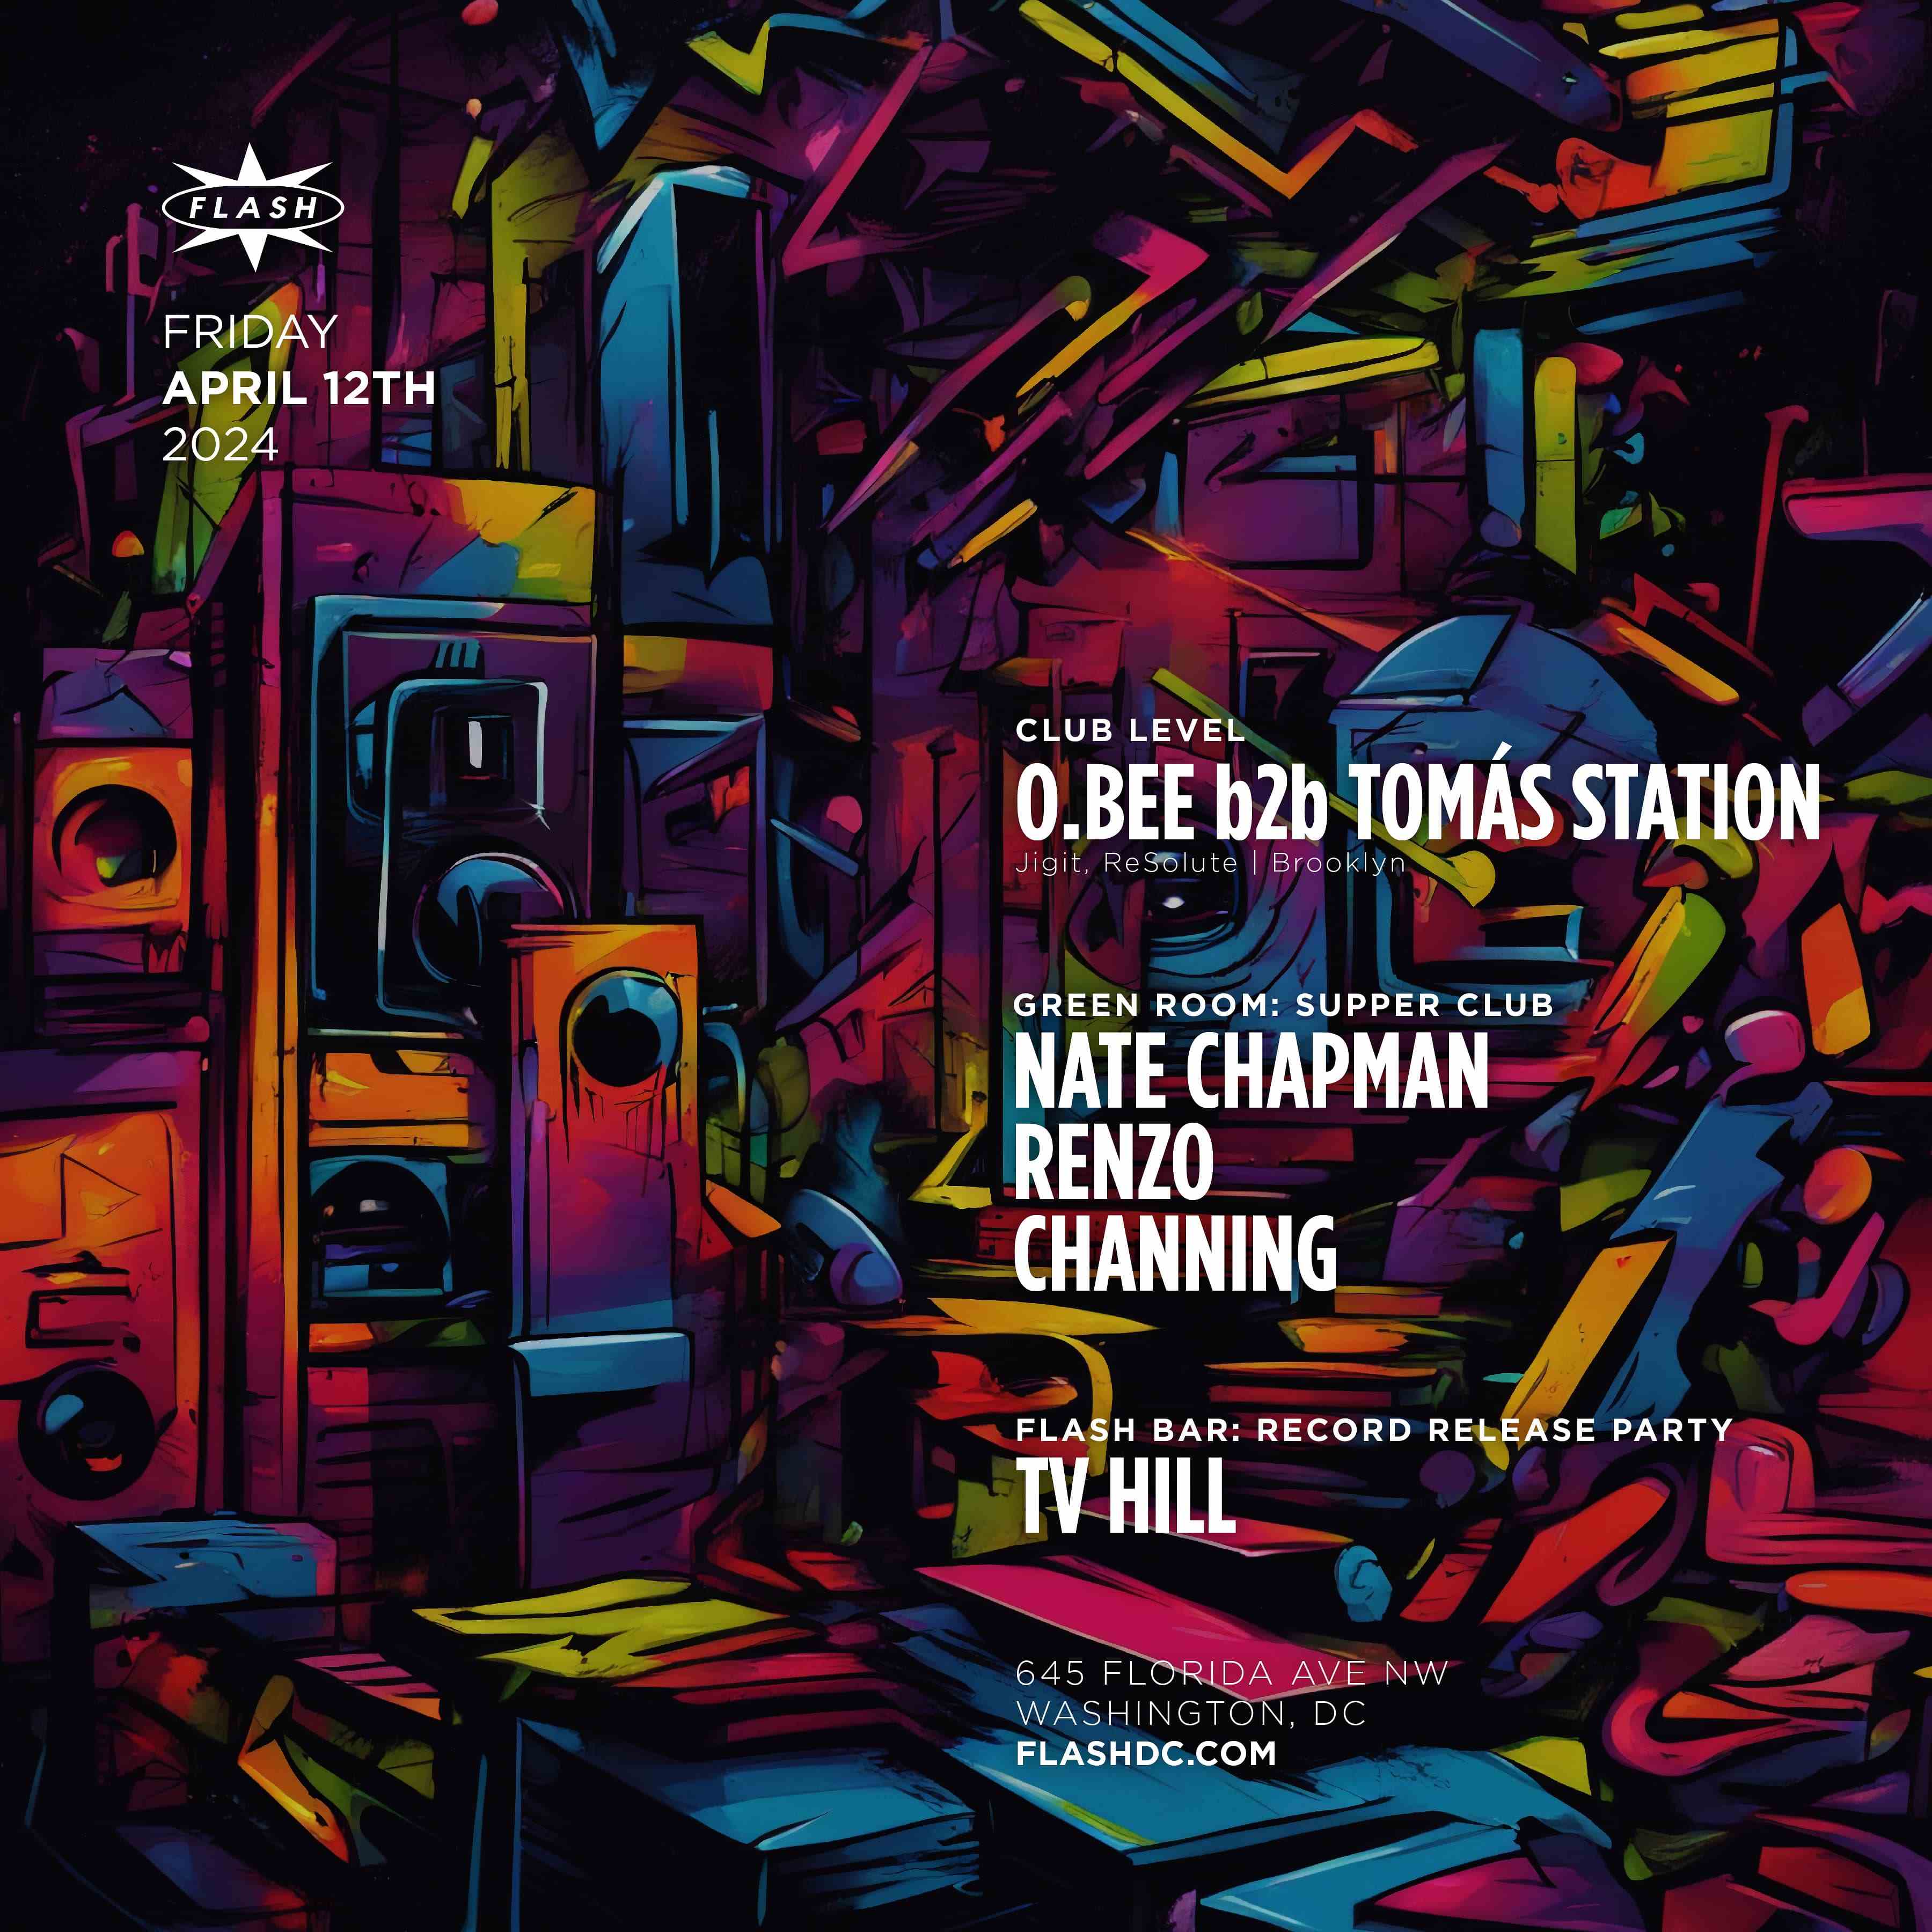 O.BEE b2b Tomás Station event flyer